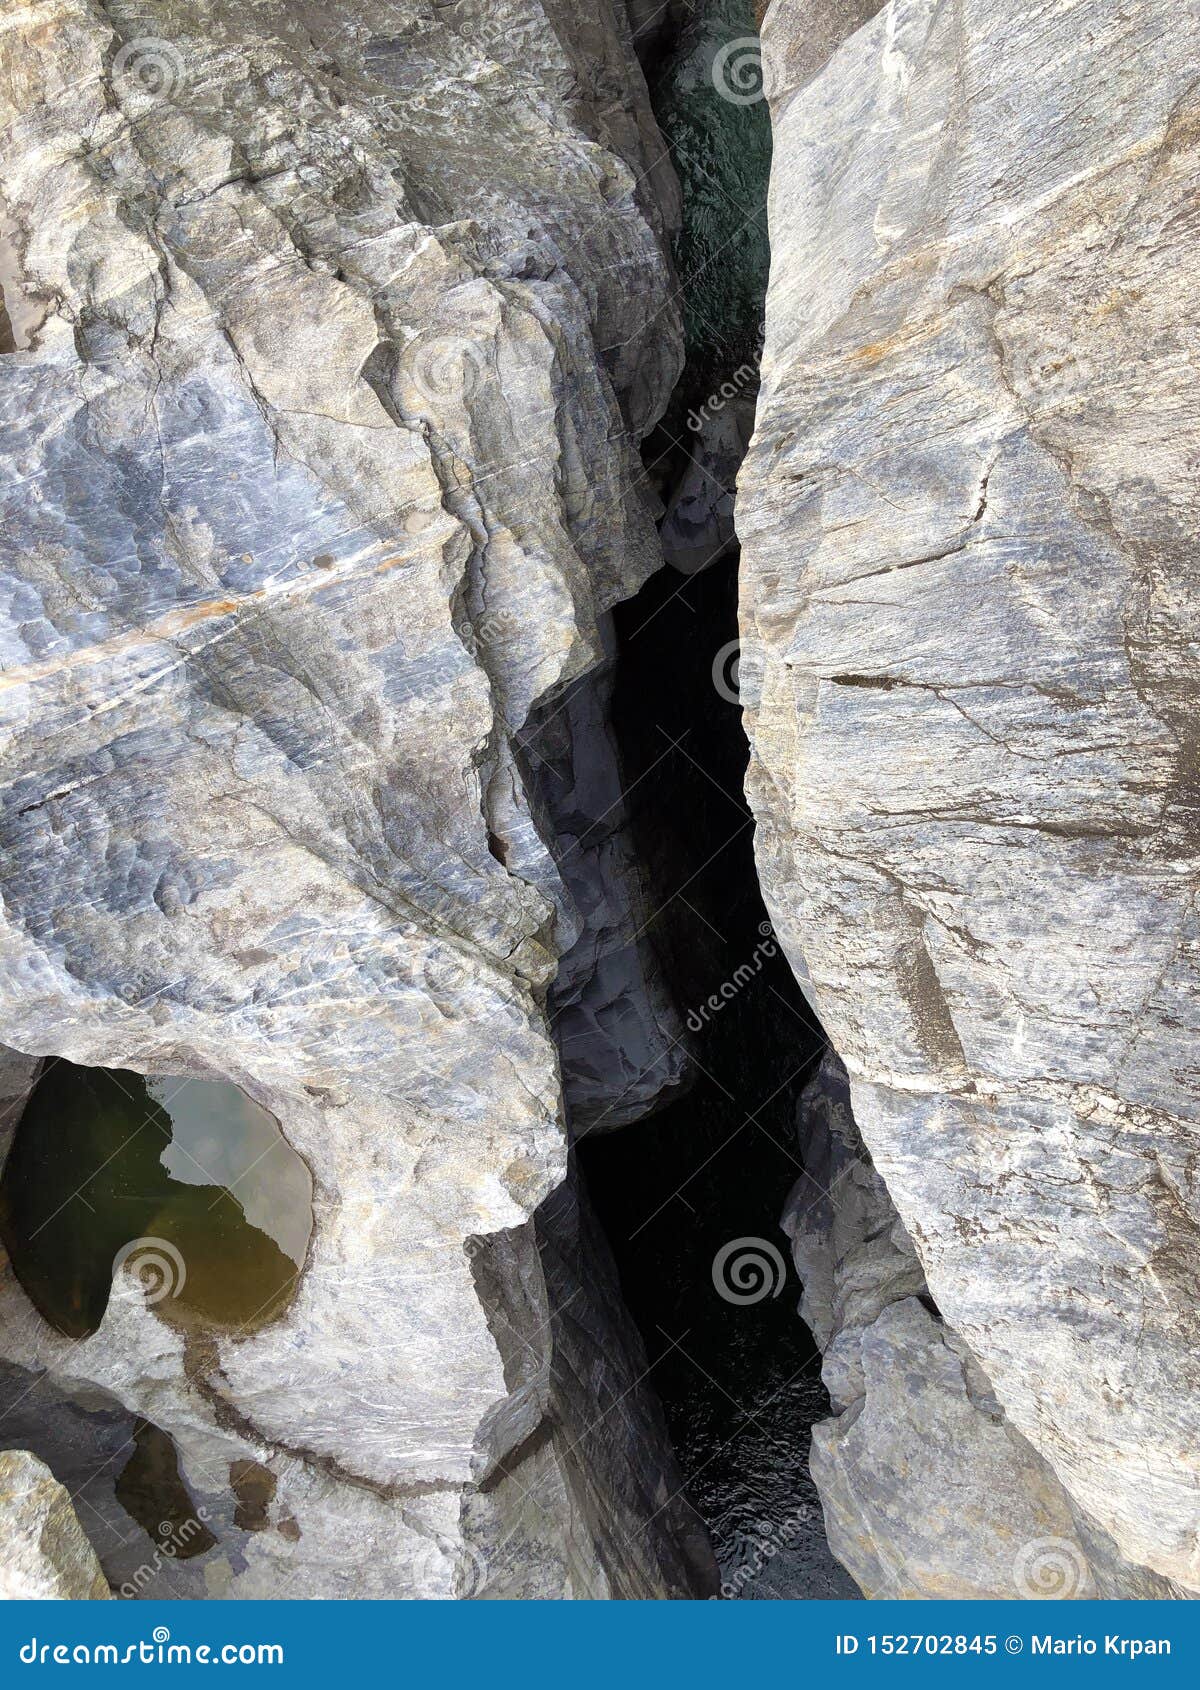 granite rock formations in the maggia river in the maggia valley or valle maggia, tegna